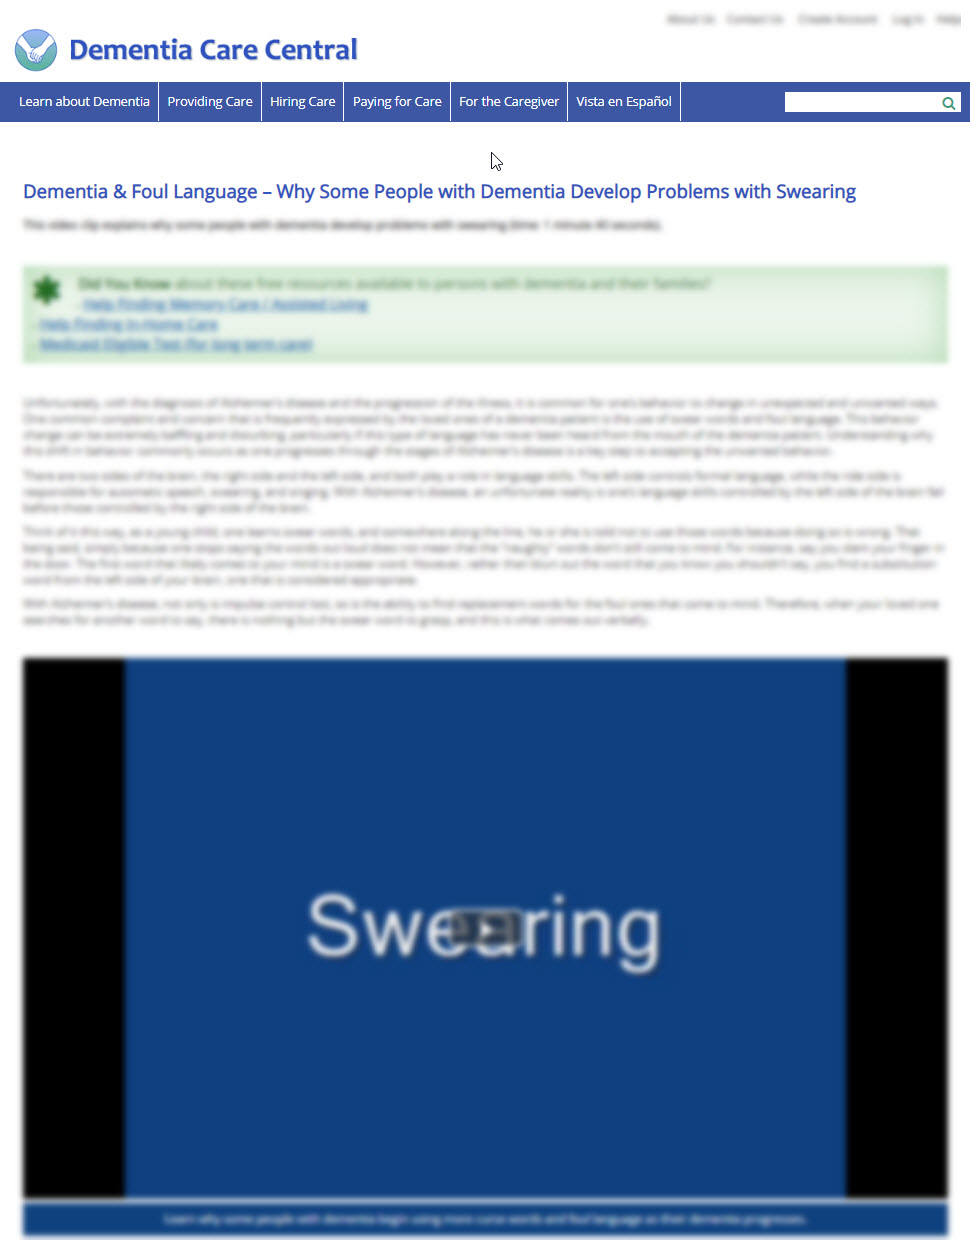 Dementia & Foul Language – Why Some People with Dementia Develop Problems with Swearing